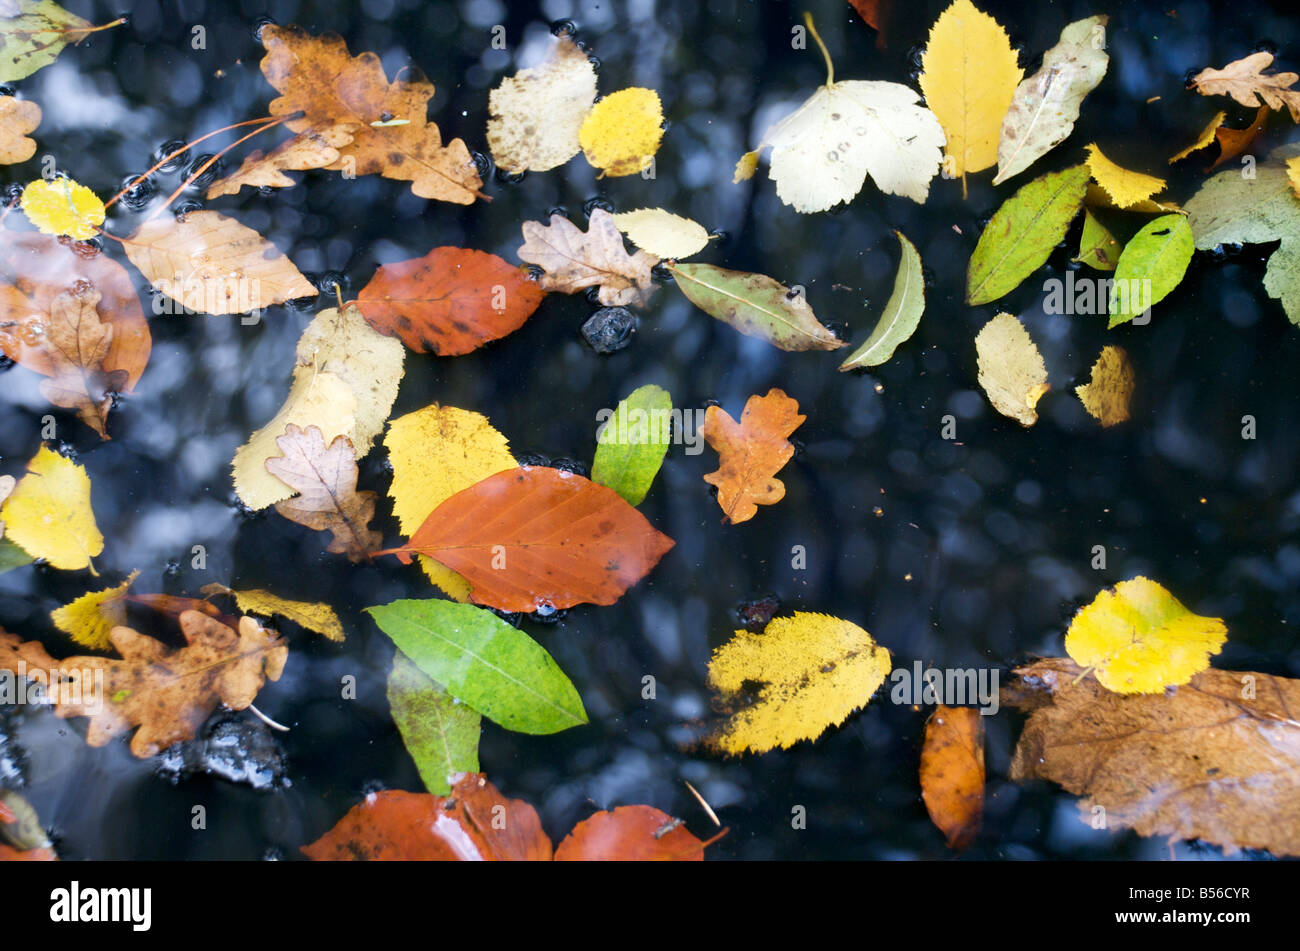 Leaves on the surface of the Welly Splash pond in RHS Harlow Carr, Harrogate Stock Photo